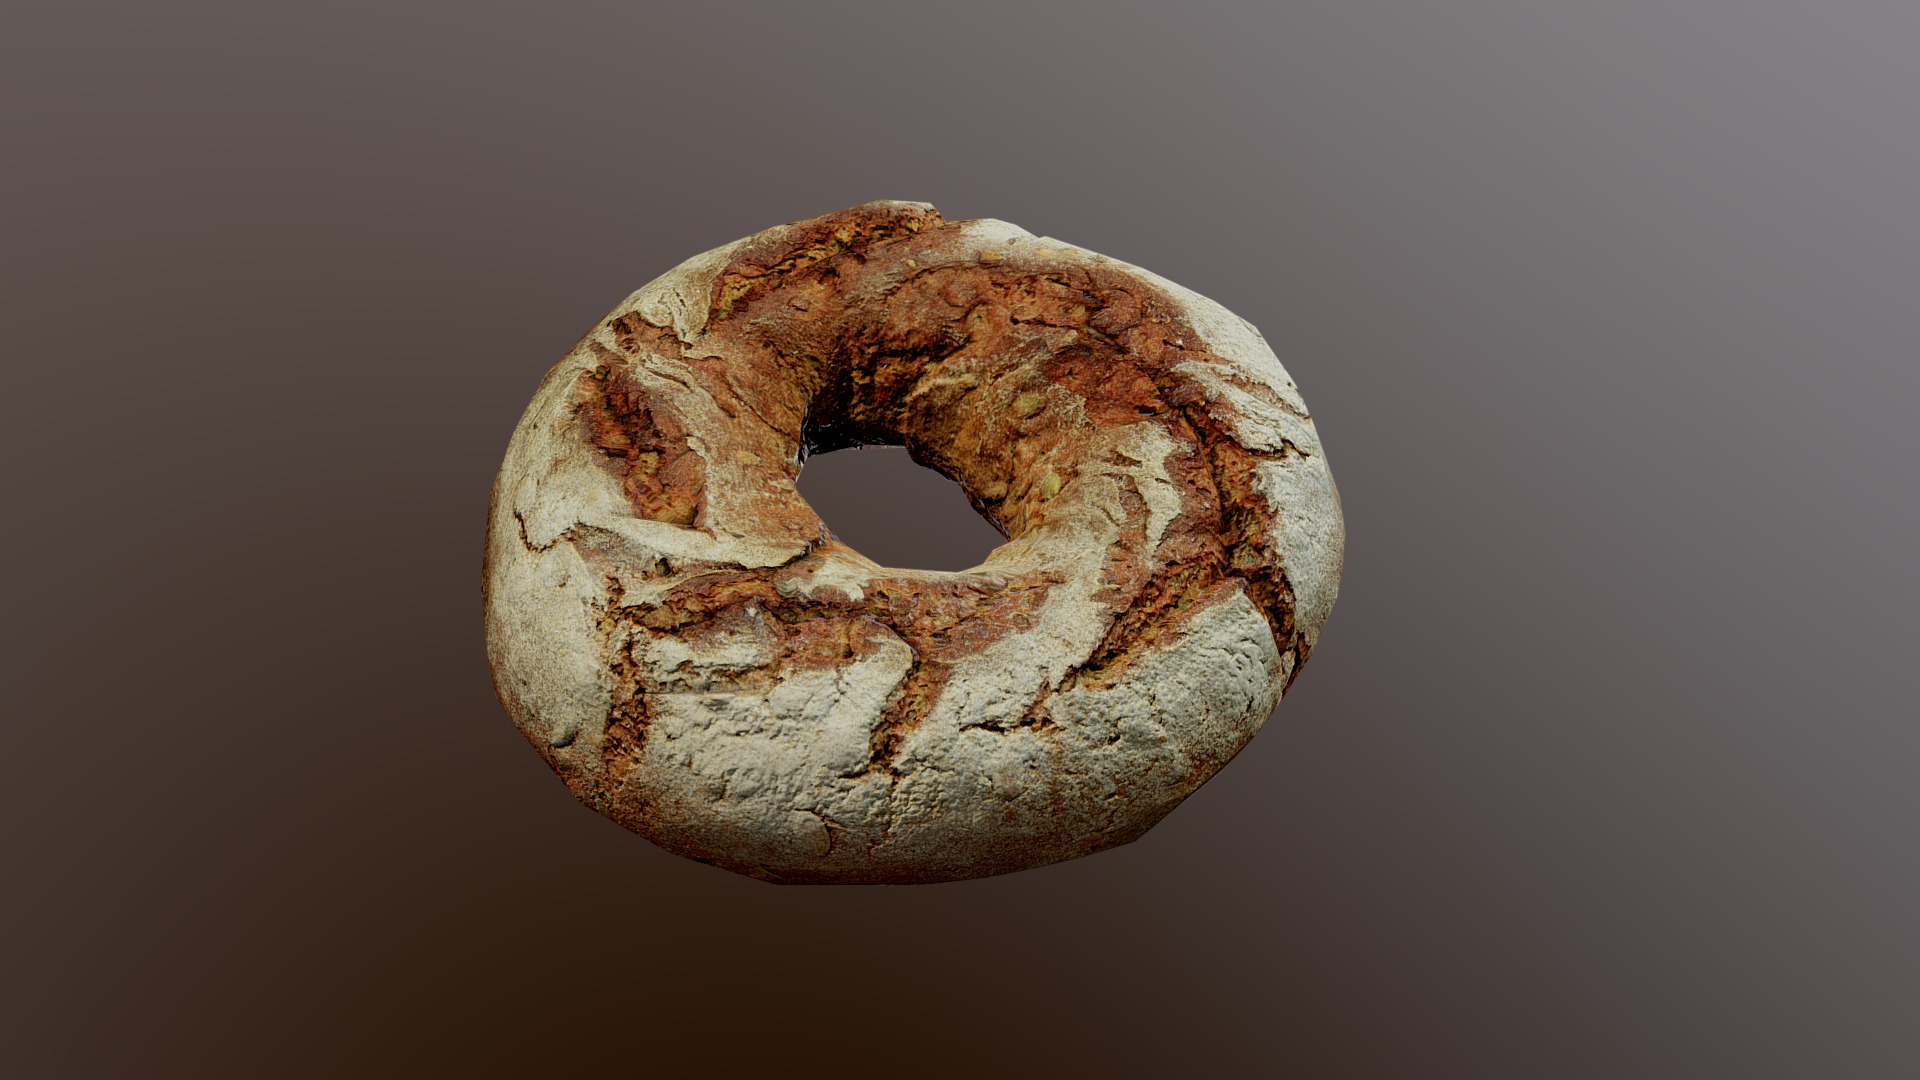 3D model TastyBreadPack vol.01 Model Ninth - This is a 3D model of the TastyBreadPack vol.01 Model Ninth. The 3D model is about a circular object with a hole in it.